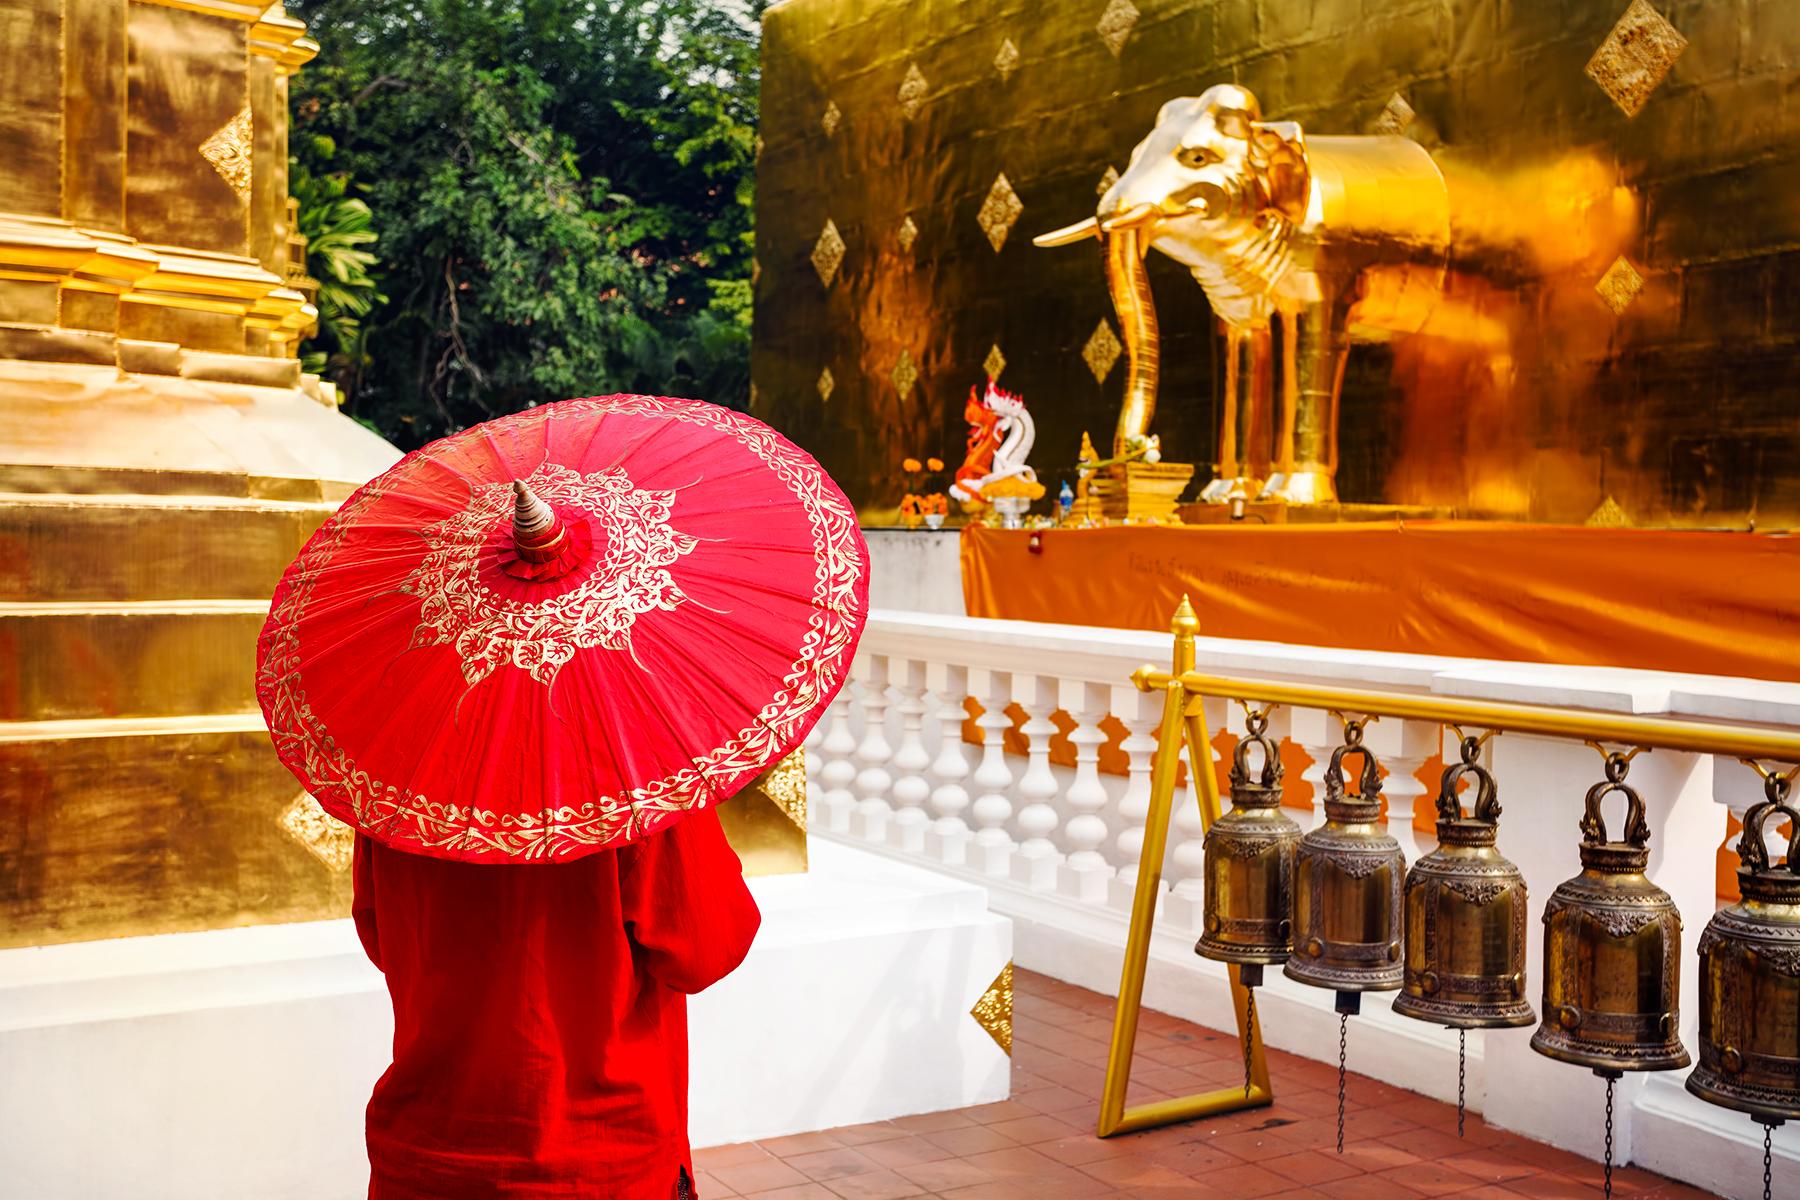 What You Need To Know Before You Visit Thailand